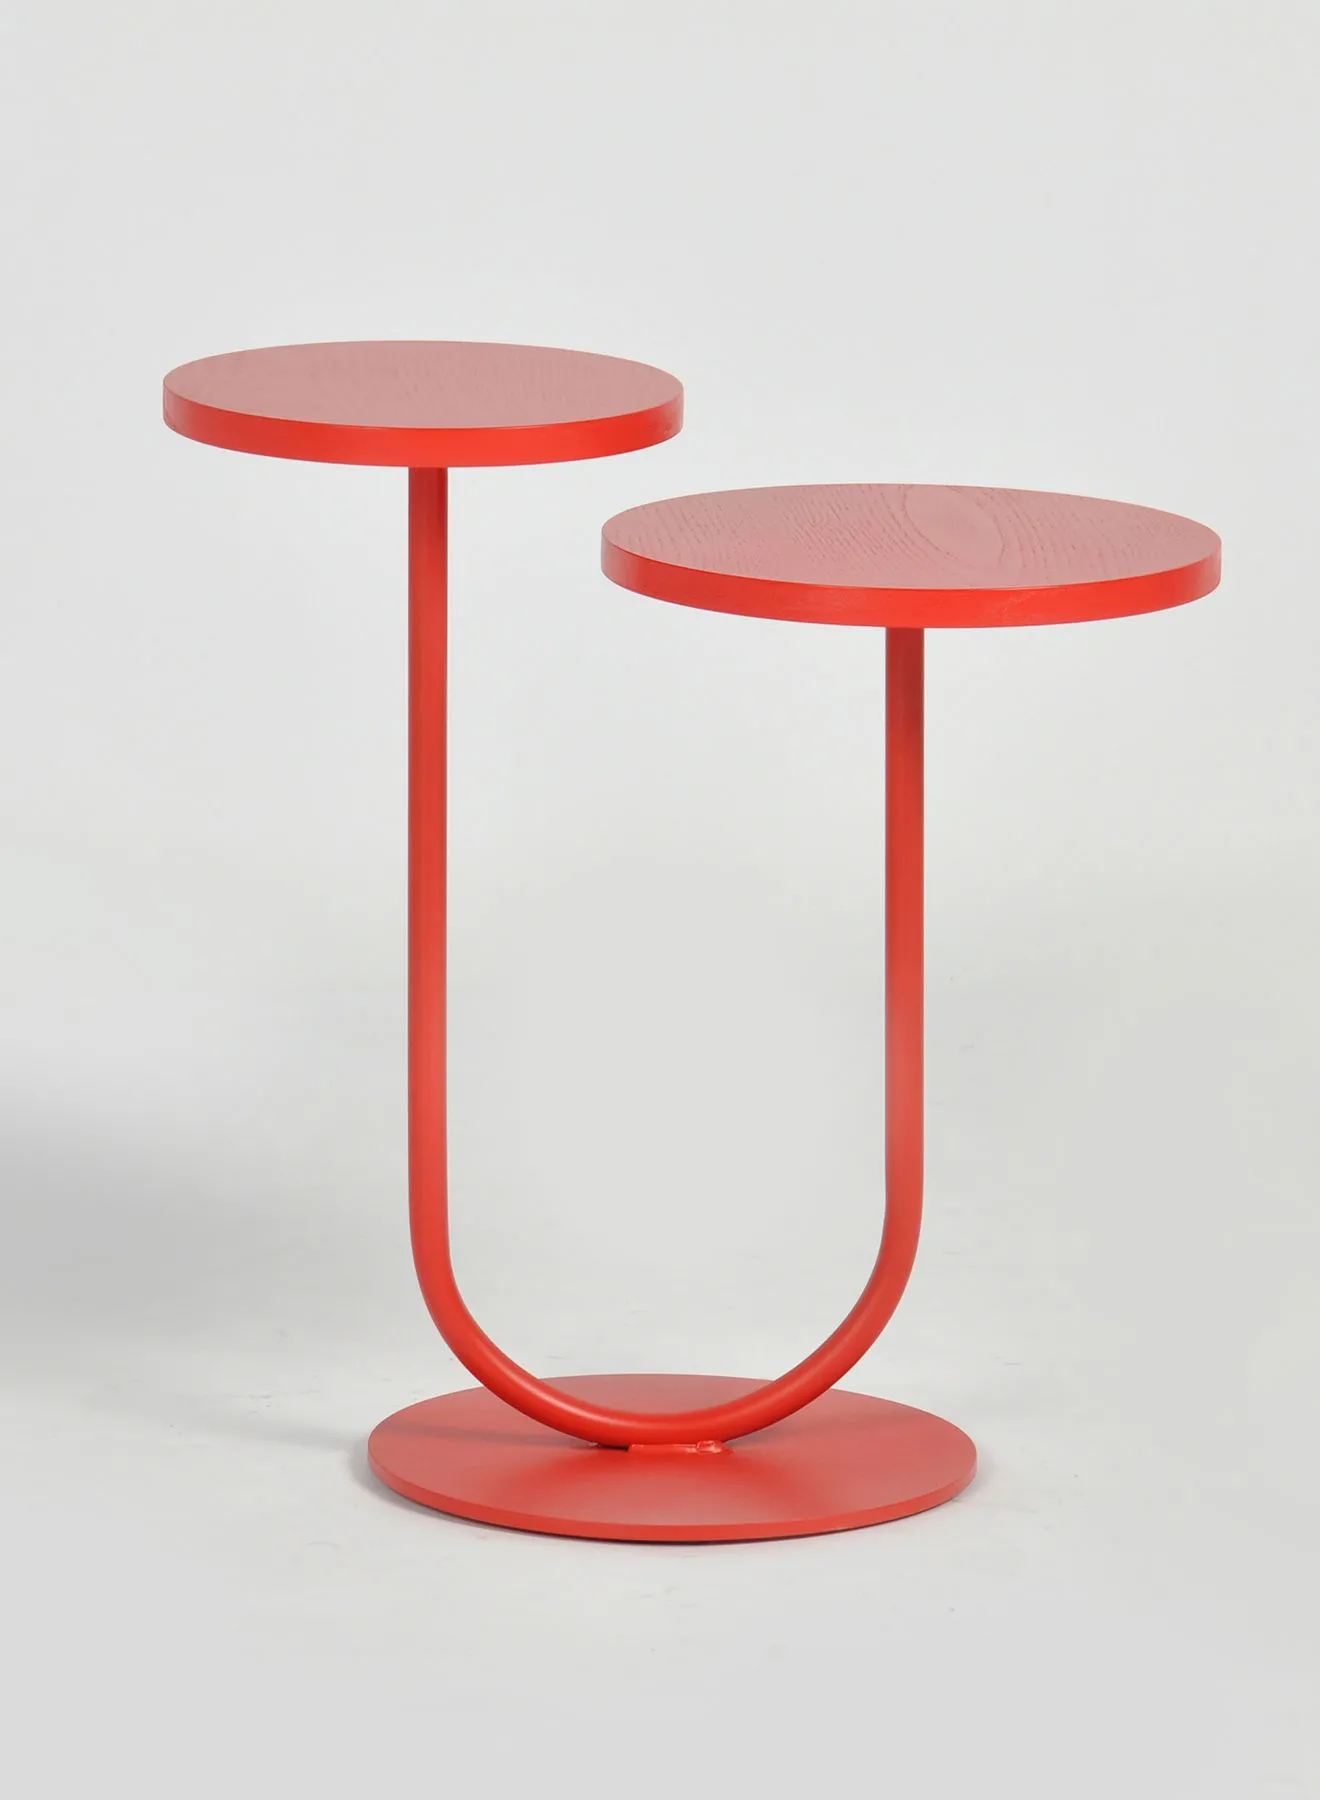 Switch Side Table - In Red - Used Next To Sofa As Coffee Corner